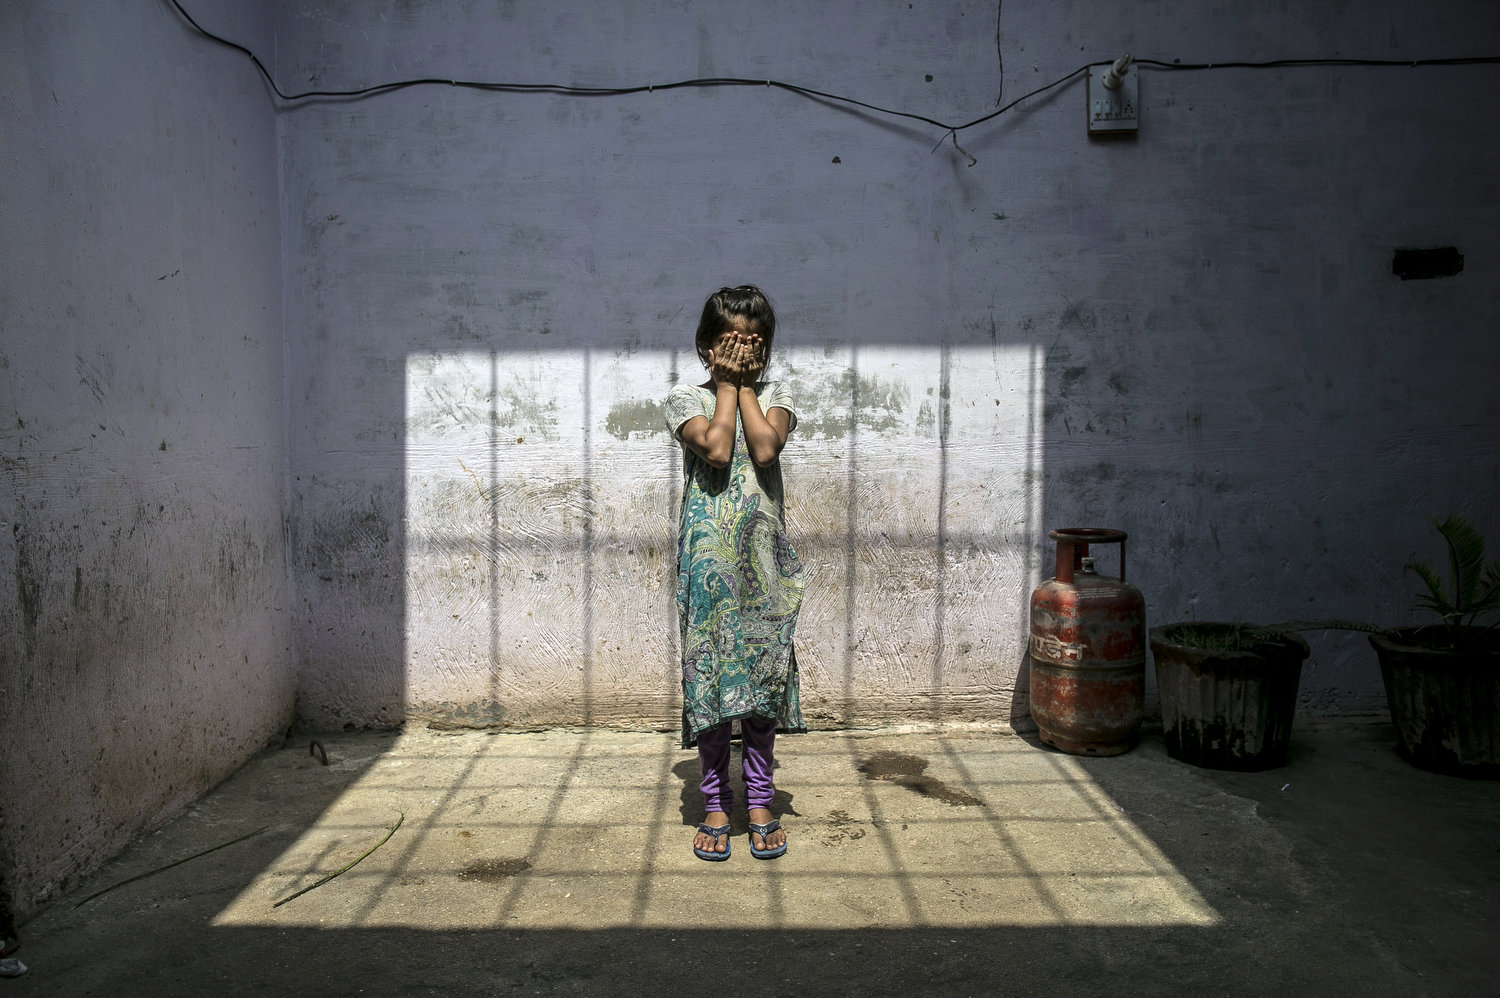 UTTAR PRADESH, INDIA - SEPTEMBER 8:  8 year old Sadaf (name changed) stands for a photo in her home September 8, 2016 in Uttar Pradesh, India. 3 months ago she was raped by a doctor in her village. She was walking to the market to buy sweets for herself when the doctor, who her family estimates is around 50 years old, forcefully pulled her inside his clinic and raped her. Afterwards she stumbled out onto the street and fainted. The doctor's brother and friend found her and dumped her body at her home. When her family found her she was covered in blood and profusely bleeding. She told them what happened and they went to the police but the police refused to register a case, they said that they should compromise, because the doctor was offering them 2 lakh rupees (around $2,989) to drop the case. The family refused, and says {quote}They destroyed the life of our child, how can we compromise?{quote}. They estimate that they and their neighbors had to go to the police station 10 times before the police agreed to register the case. For 5 days after the rape, Sadaf continued to bleed and they had to shuffle from hospital to hospital looking for a hospital that had facilities that could provide adequate care for her. Since the rape Sadaf has been sick and week and is too afraid to leave the house or return to school. The family is also afraid to let her leave the house because they say the rapist comes from a rich and powerful family and could harm her or kidnap her. Before the rape she enjoyed going to school and dreamed of being an English teacher when she grows up. She loved to play board games and cricket with her best friend, Nisha, but she hasn't seen her for 3 months. Sadaf's uncle, who is fighting the case, has taken out two loans to help pay for transportation to the court house and for lawyer bills. Every time he  has to go to court he must take off work from his job as a day laborer. Sadaf's aunt says {quote}For us, this is very difficult because the law doesn't support us. We hav